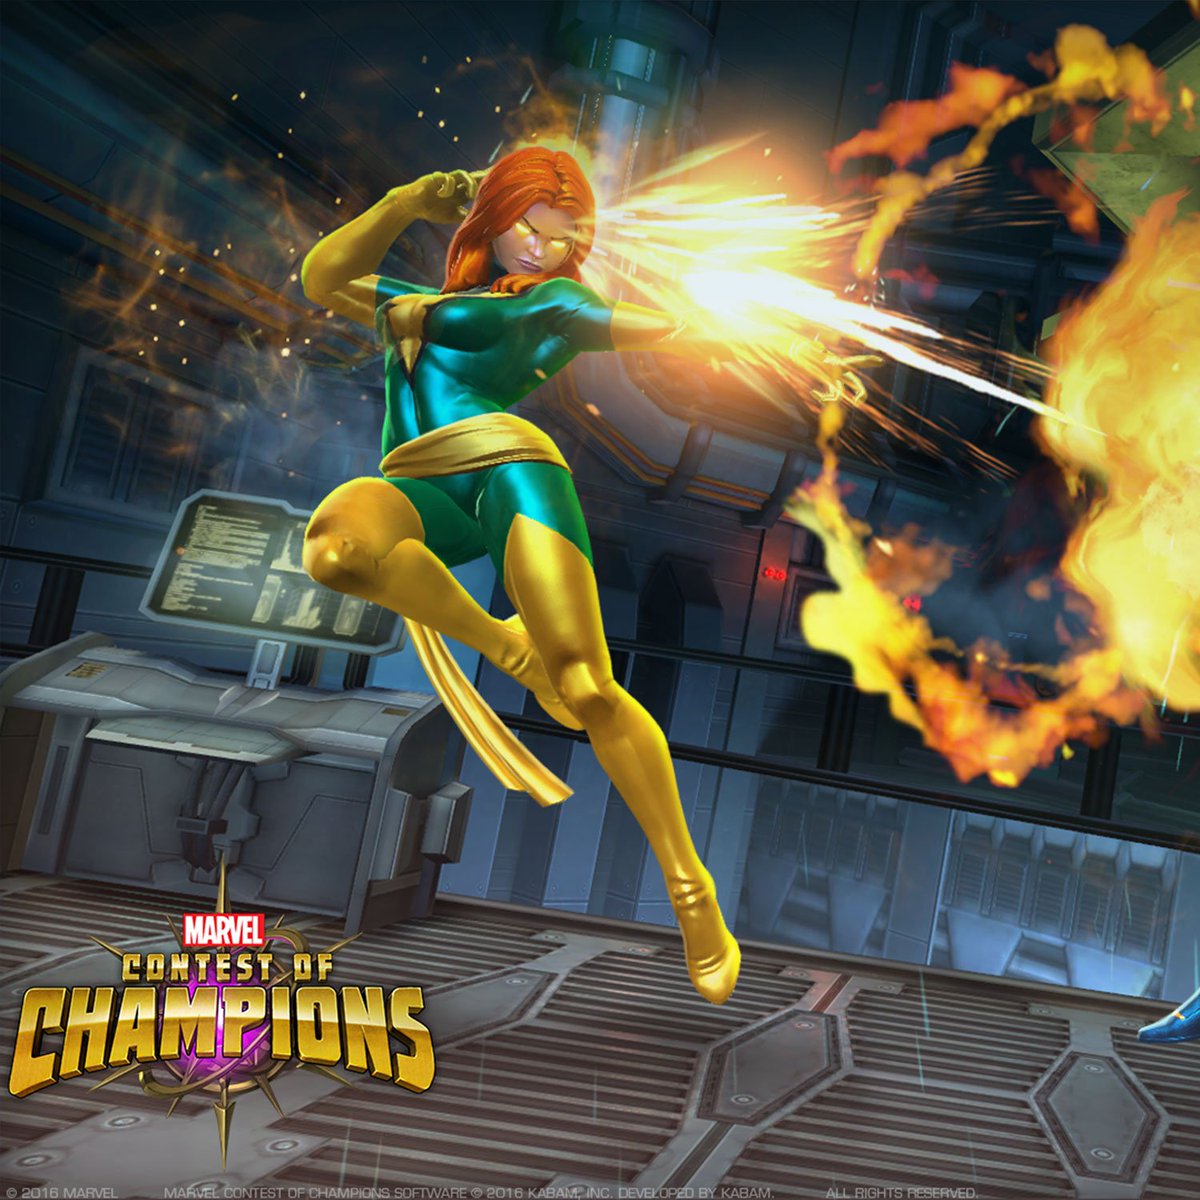 Alisson on Twitter "Marvel MarvelChampions add her to